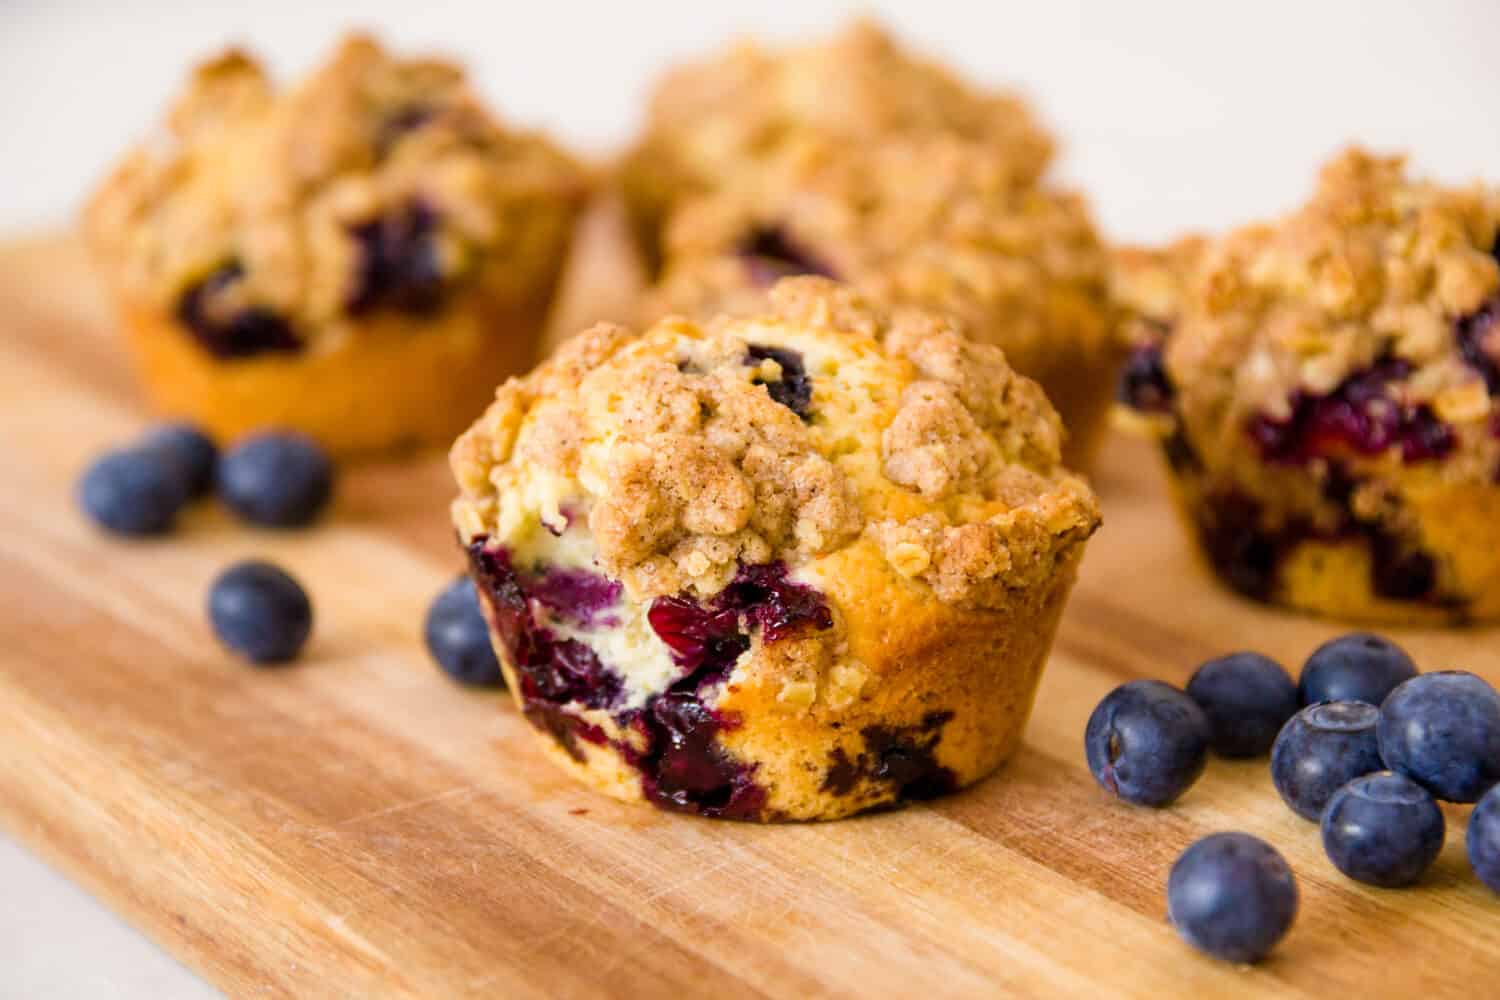 freshly baked blueberry muffins with an oat crumble topping on a natural wooden board